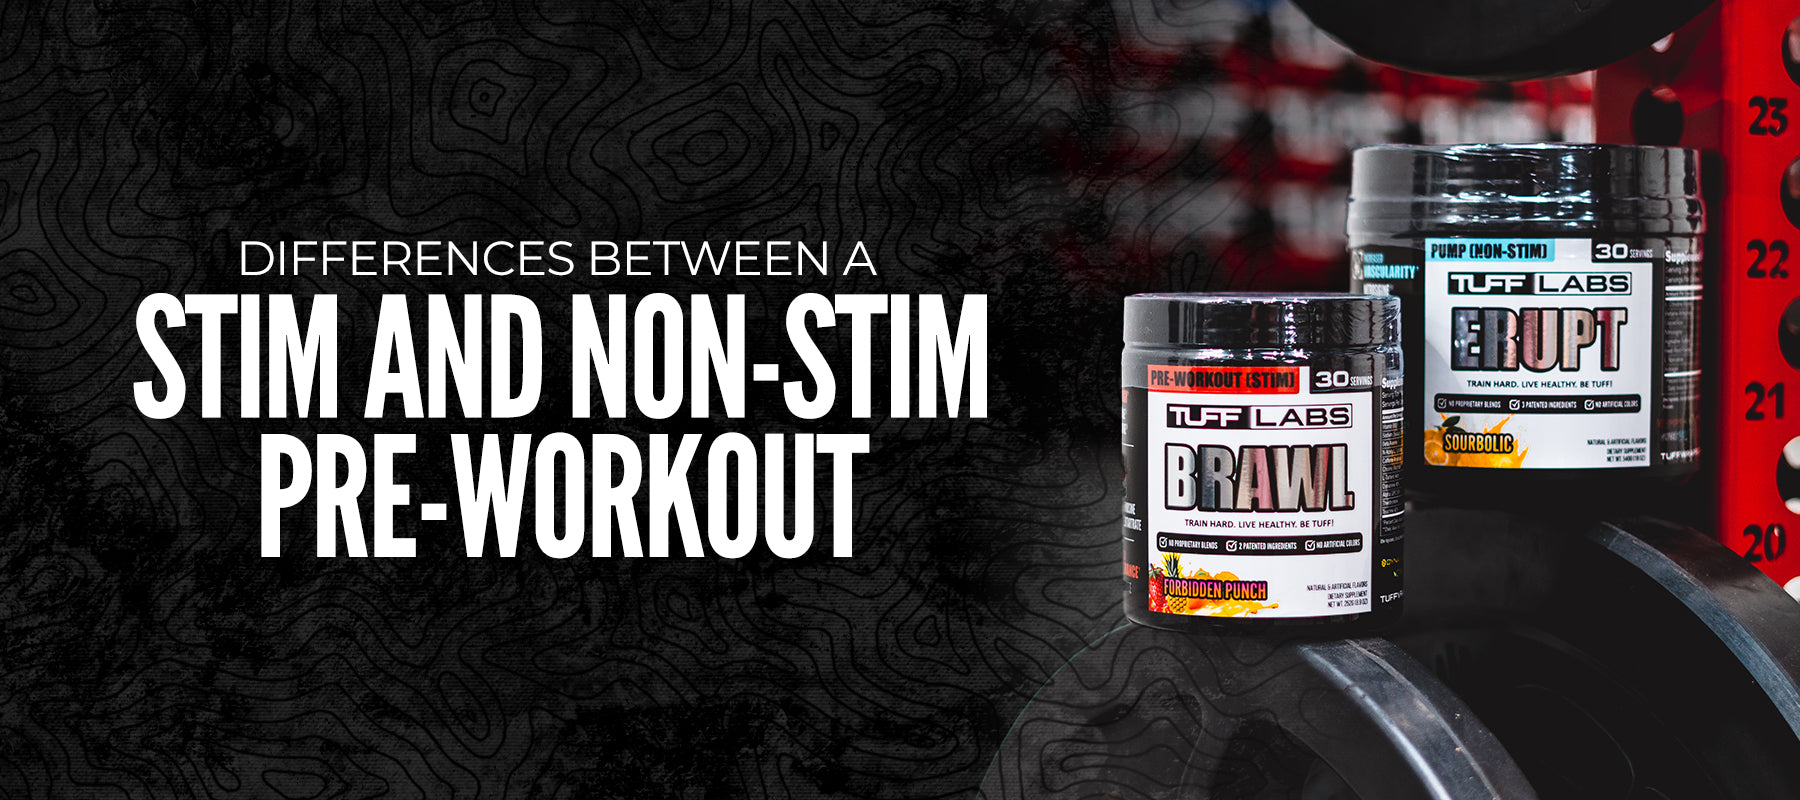 Differences Between a Stim and Non-stim Pre-workout